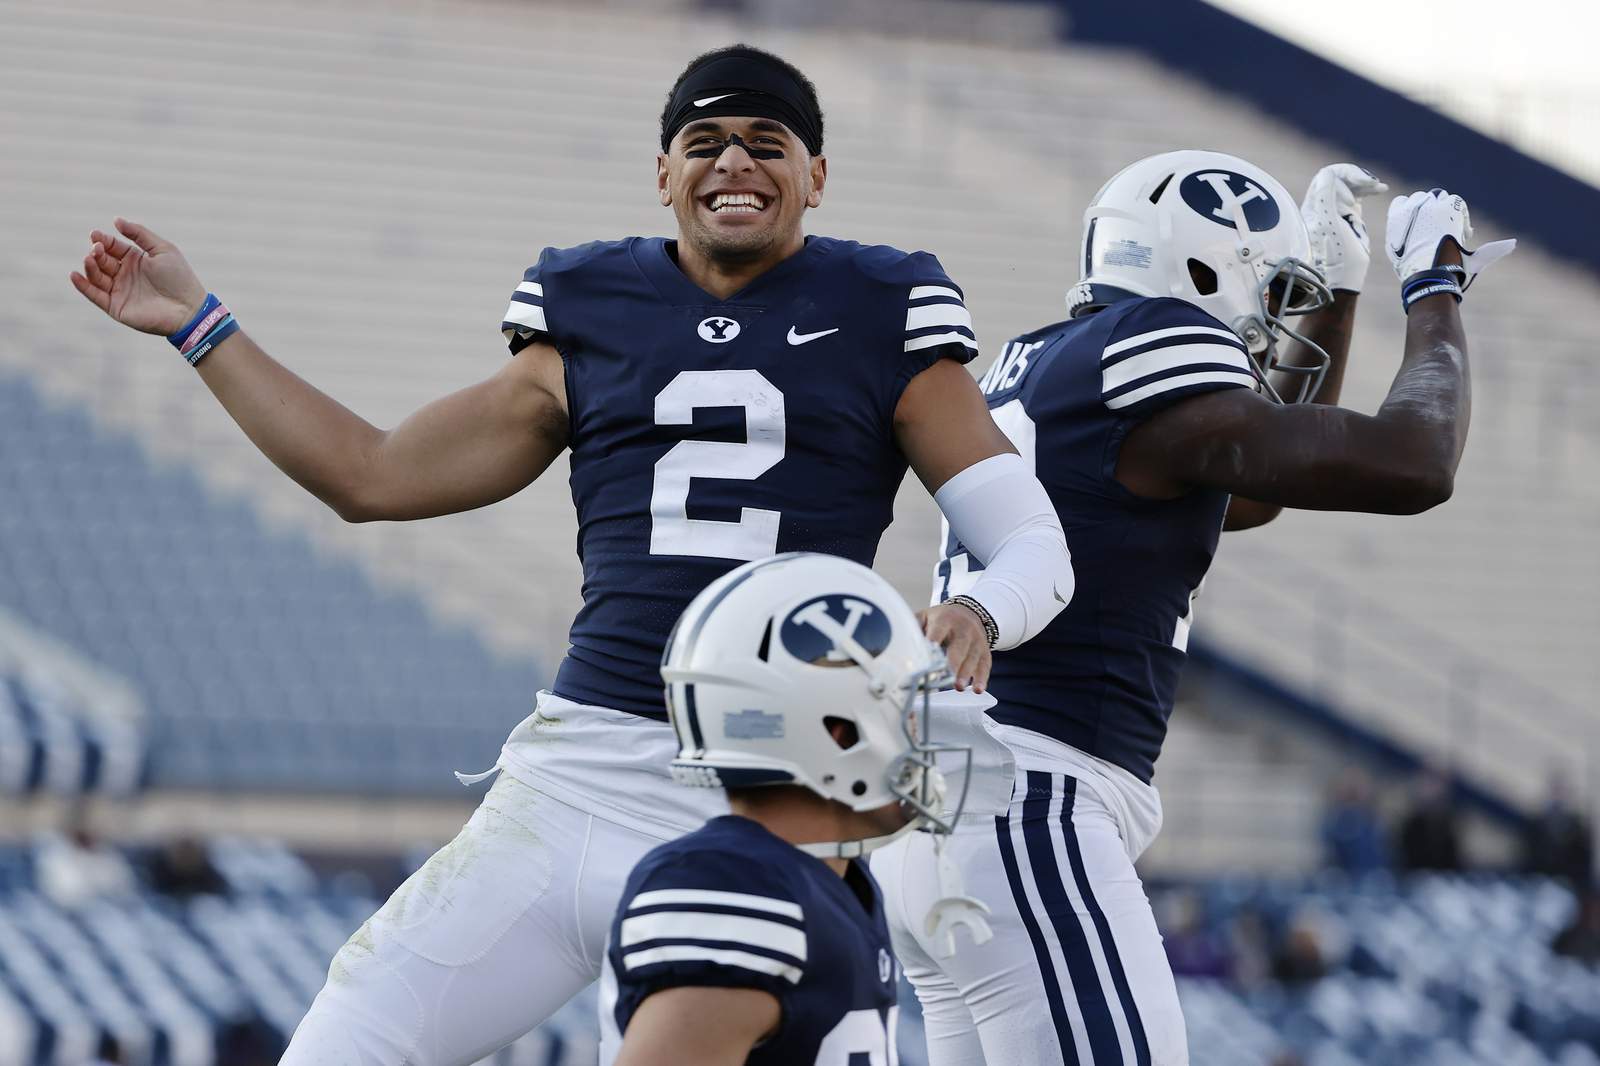 Plan B as in BYU: Cougars face Chanticleers on short notice